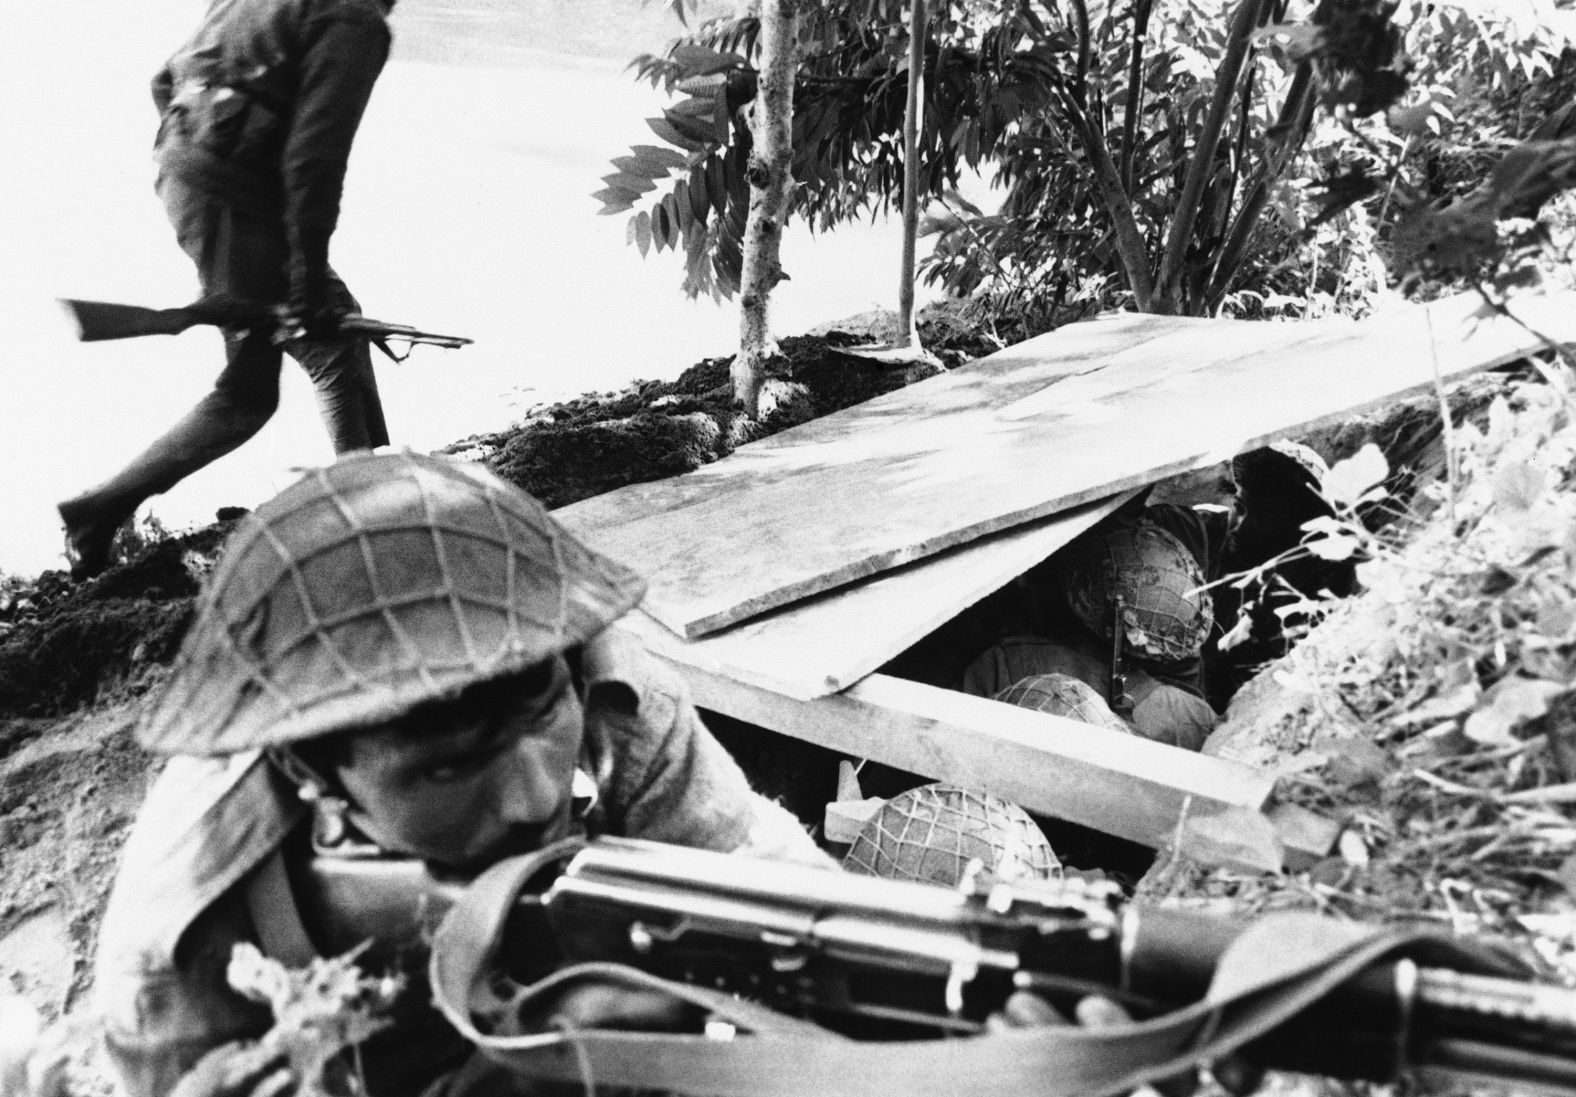 A Pakistani soldier aims his rifle, while a fellow soldier runs for cover during Indian shelling of Pakistani positions in East Pakistan on December 2, 1971. A third war between India and Pakistan in East Pakistan ends with the creation of Bangladesh.